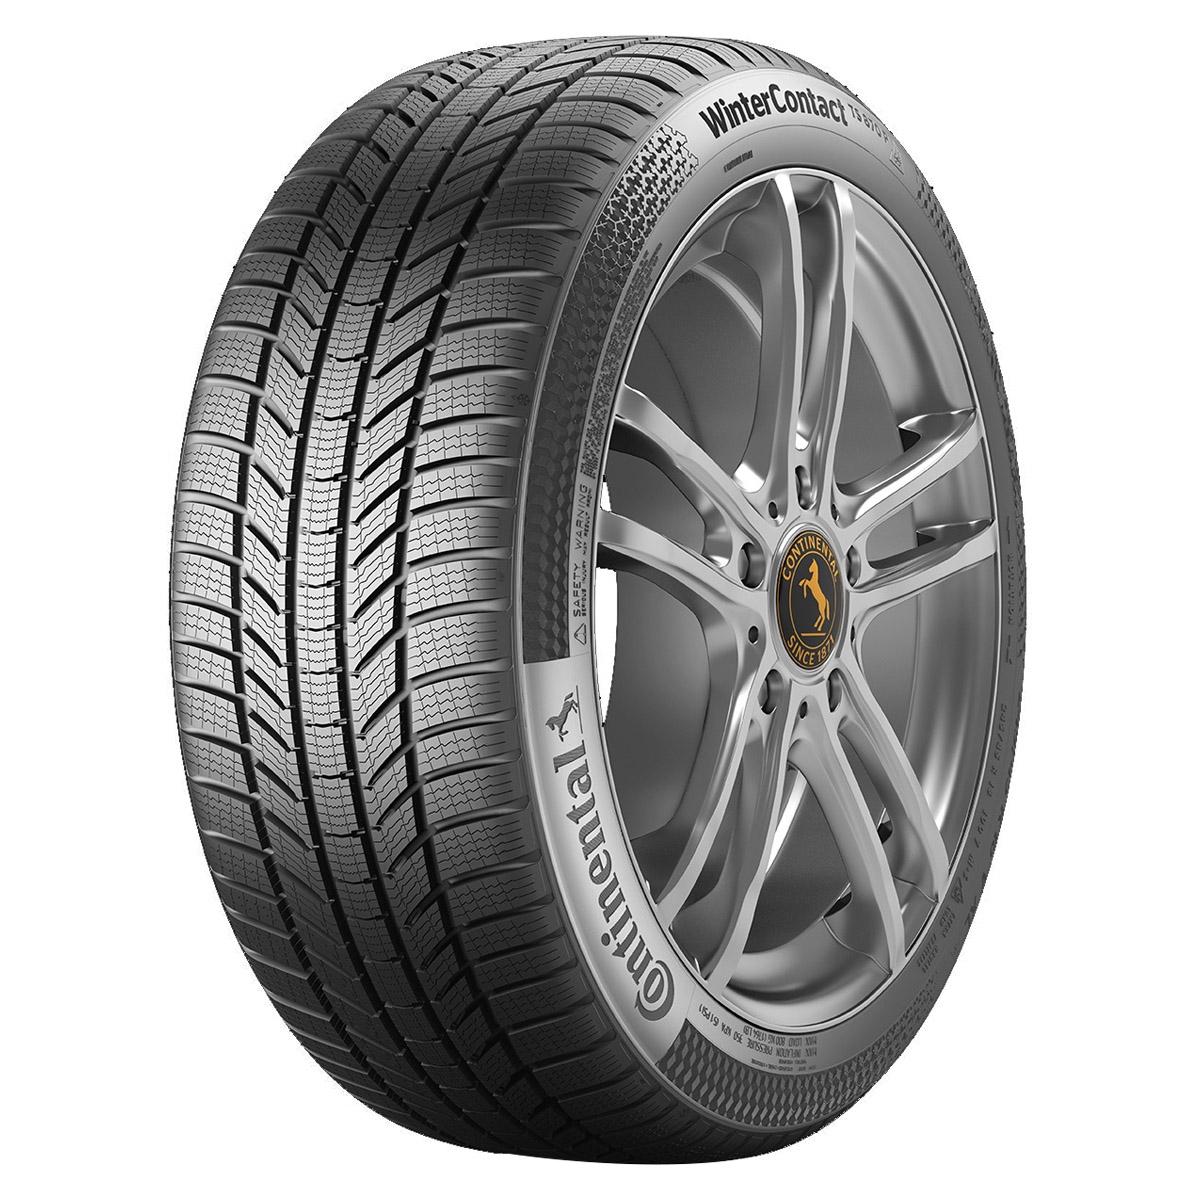 Anvelope iarna CONTINENTAL WINTER CONTACT TS870 P FR 215/65 R16 98H